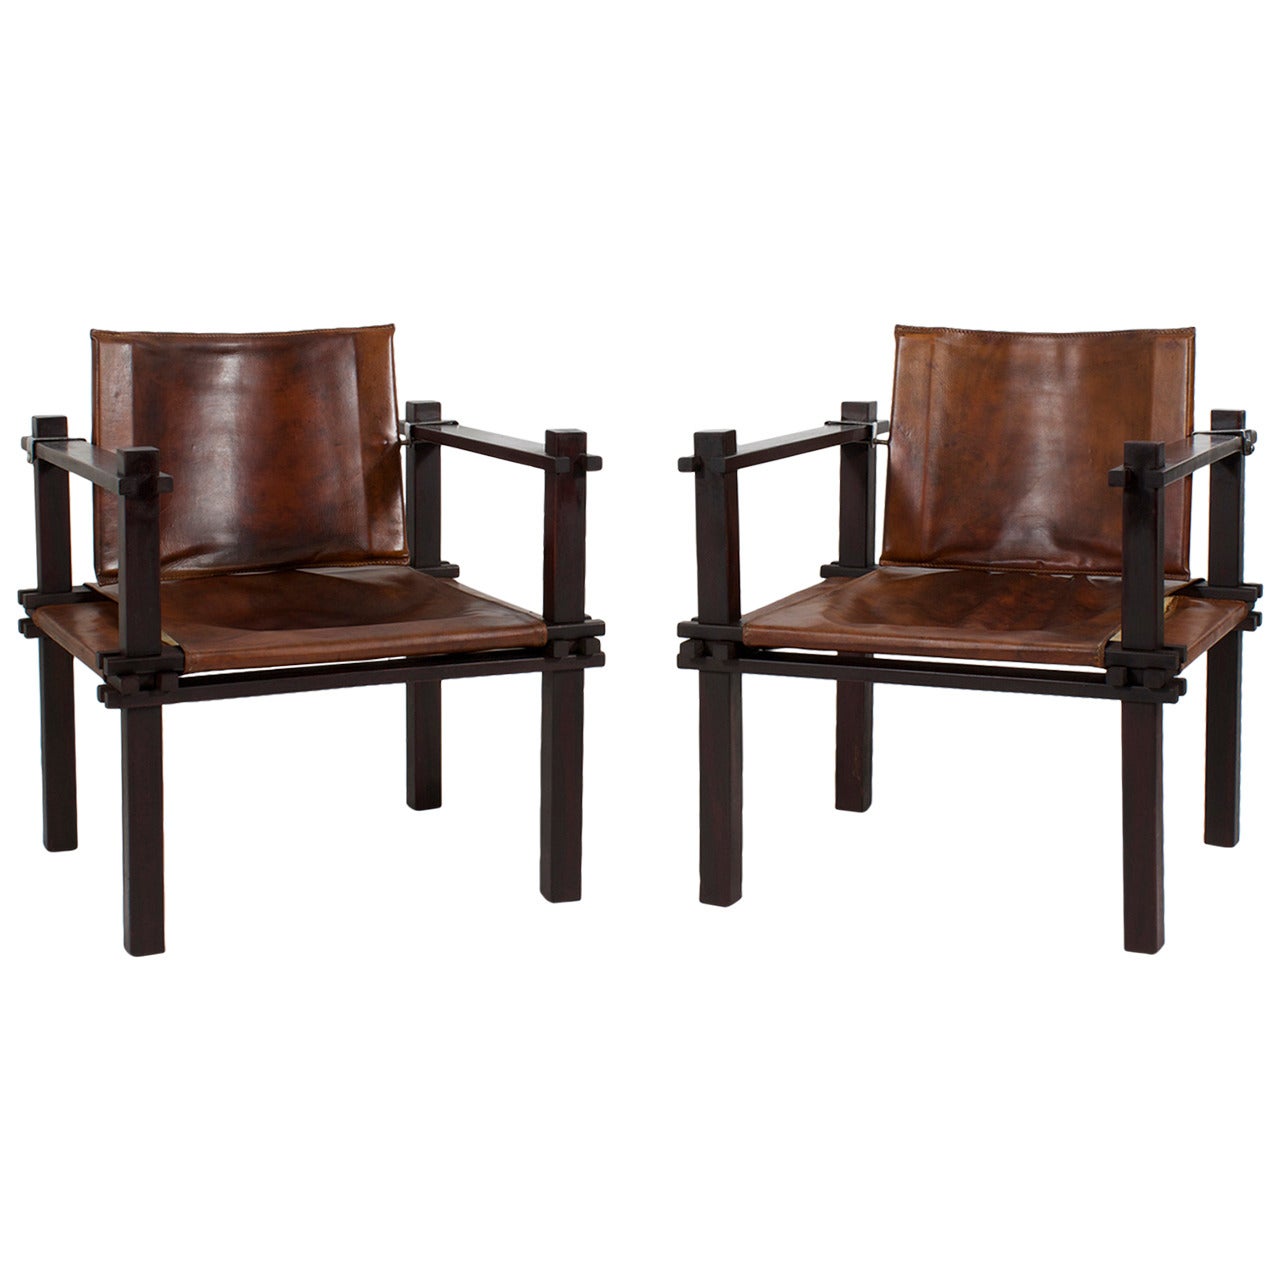 Pair of Fantastic Rosewood and Leather Sling or Safari Chairs